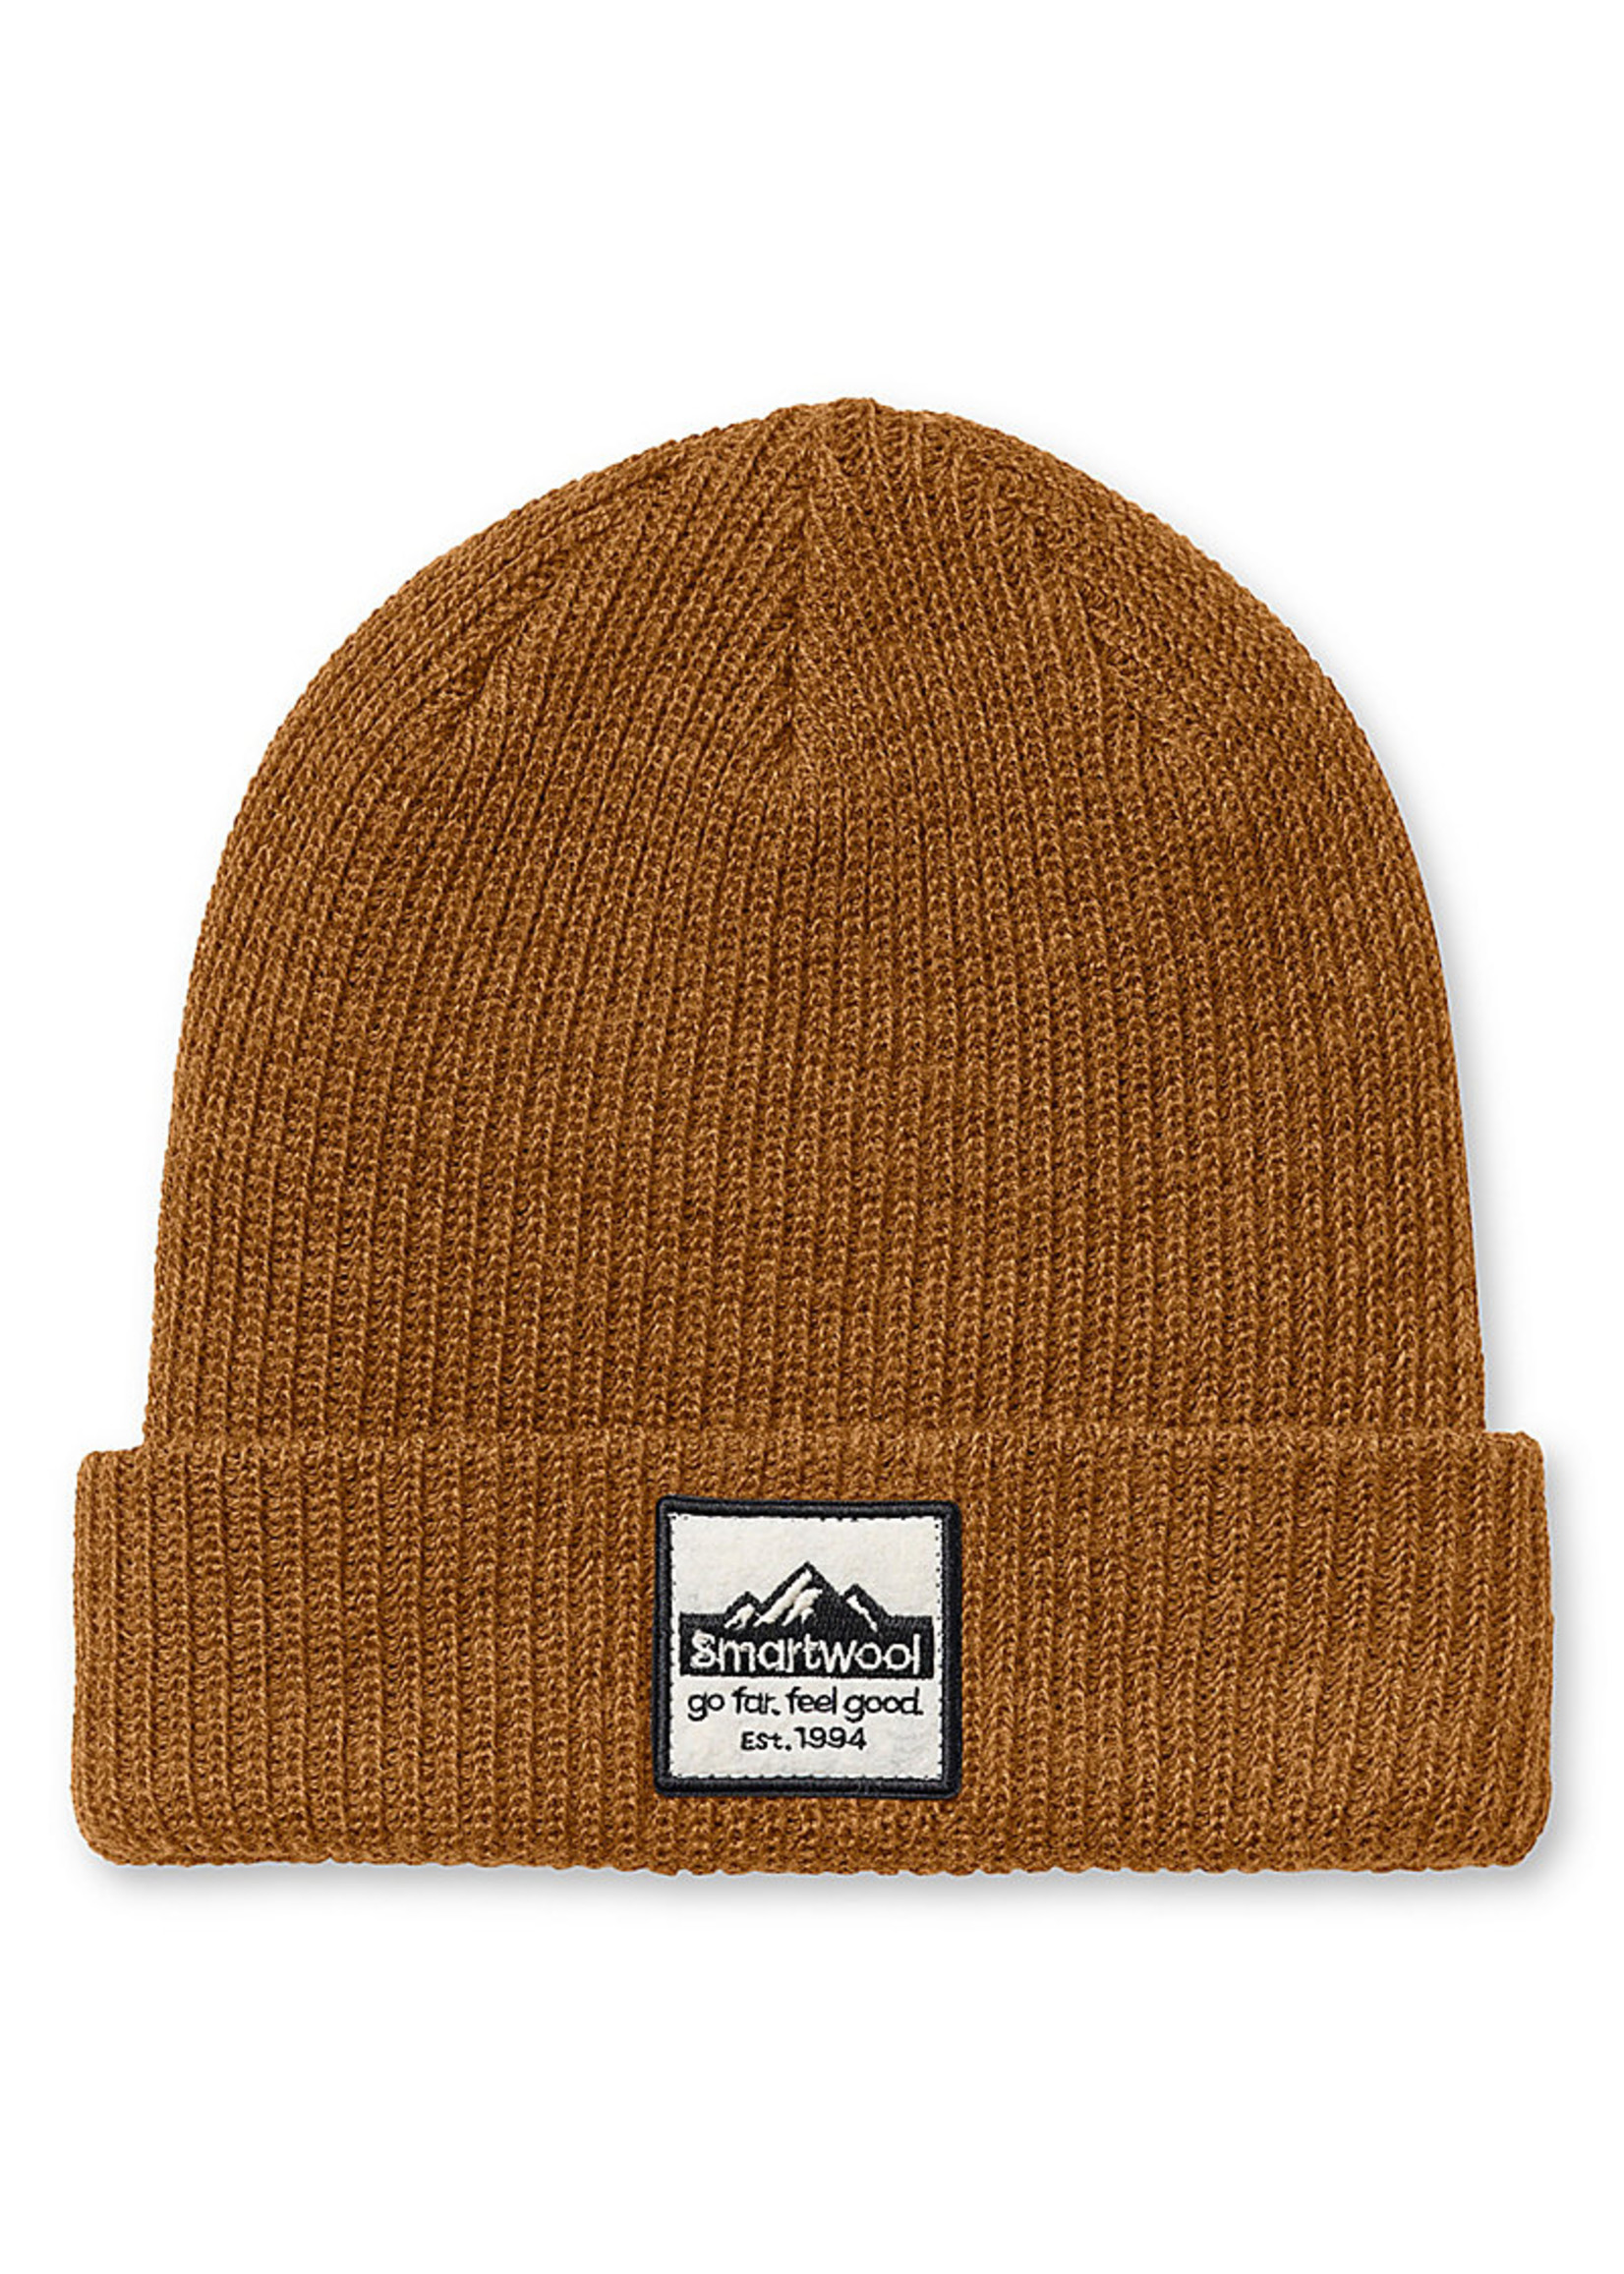 SMARTWOOL Smartwool® Patch Beanie